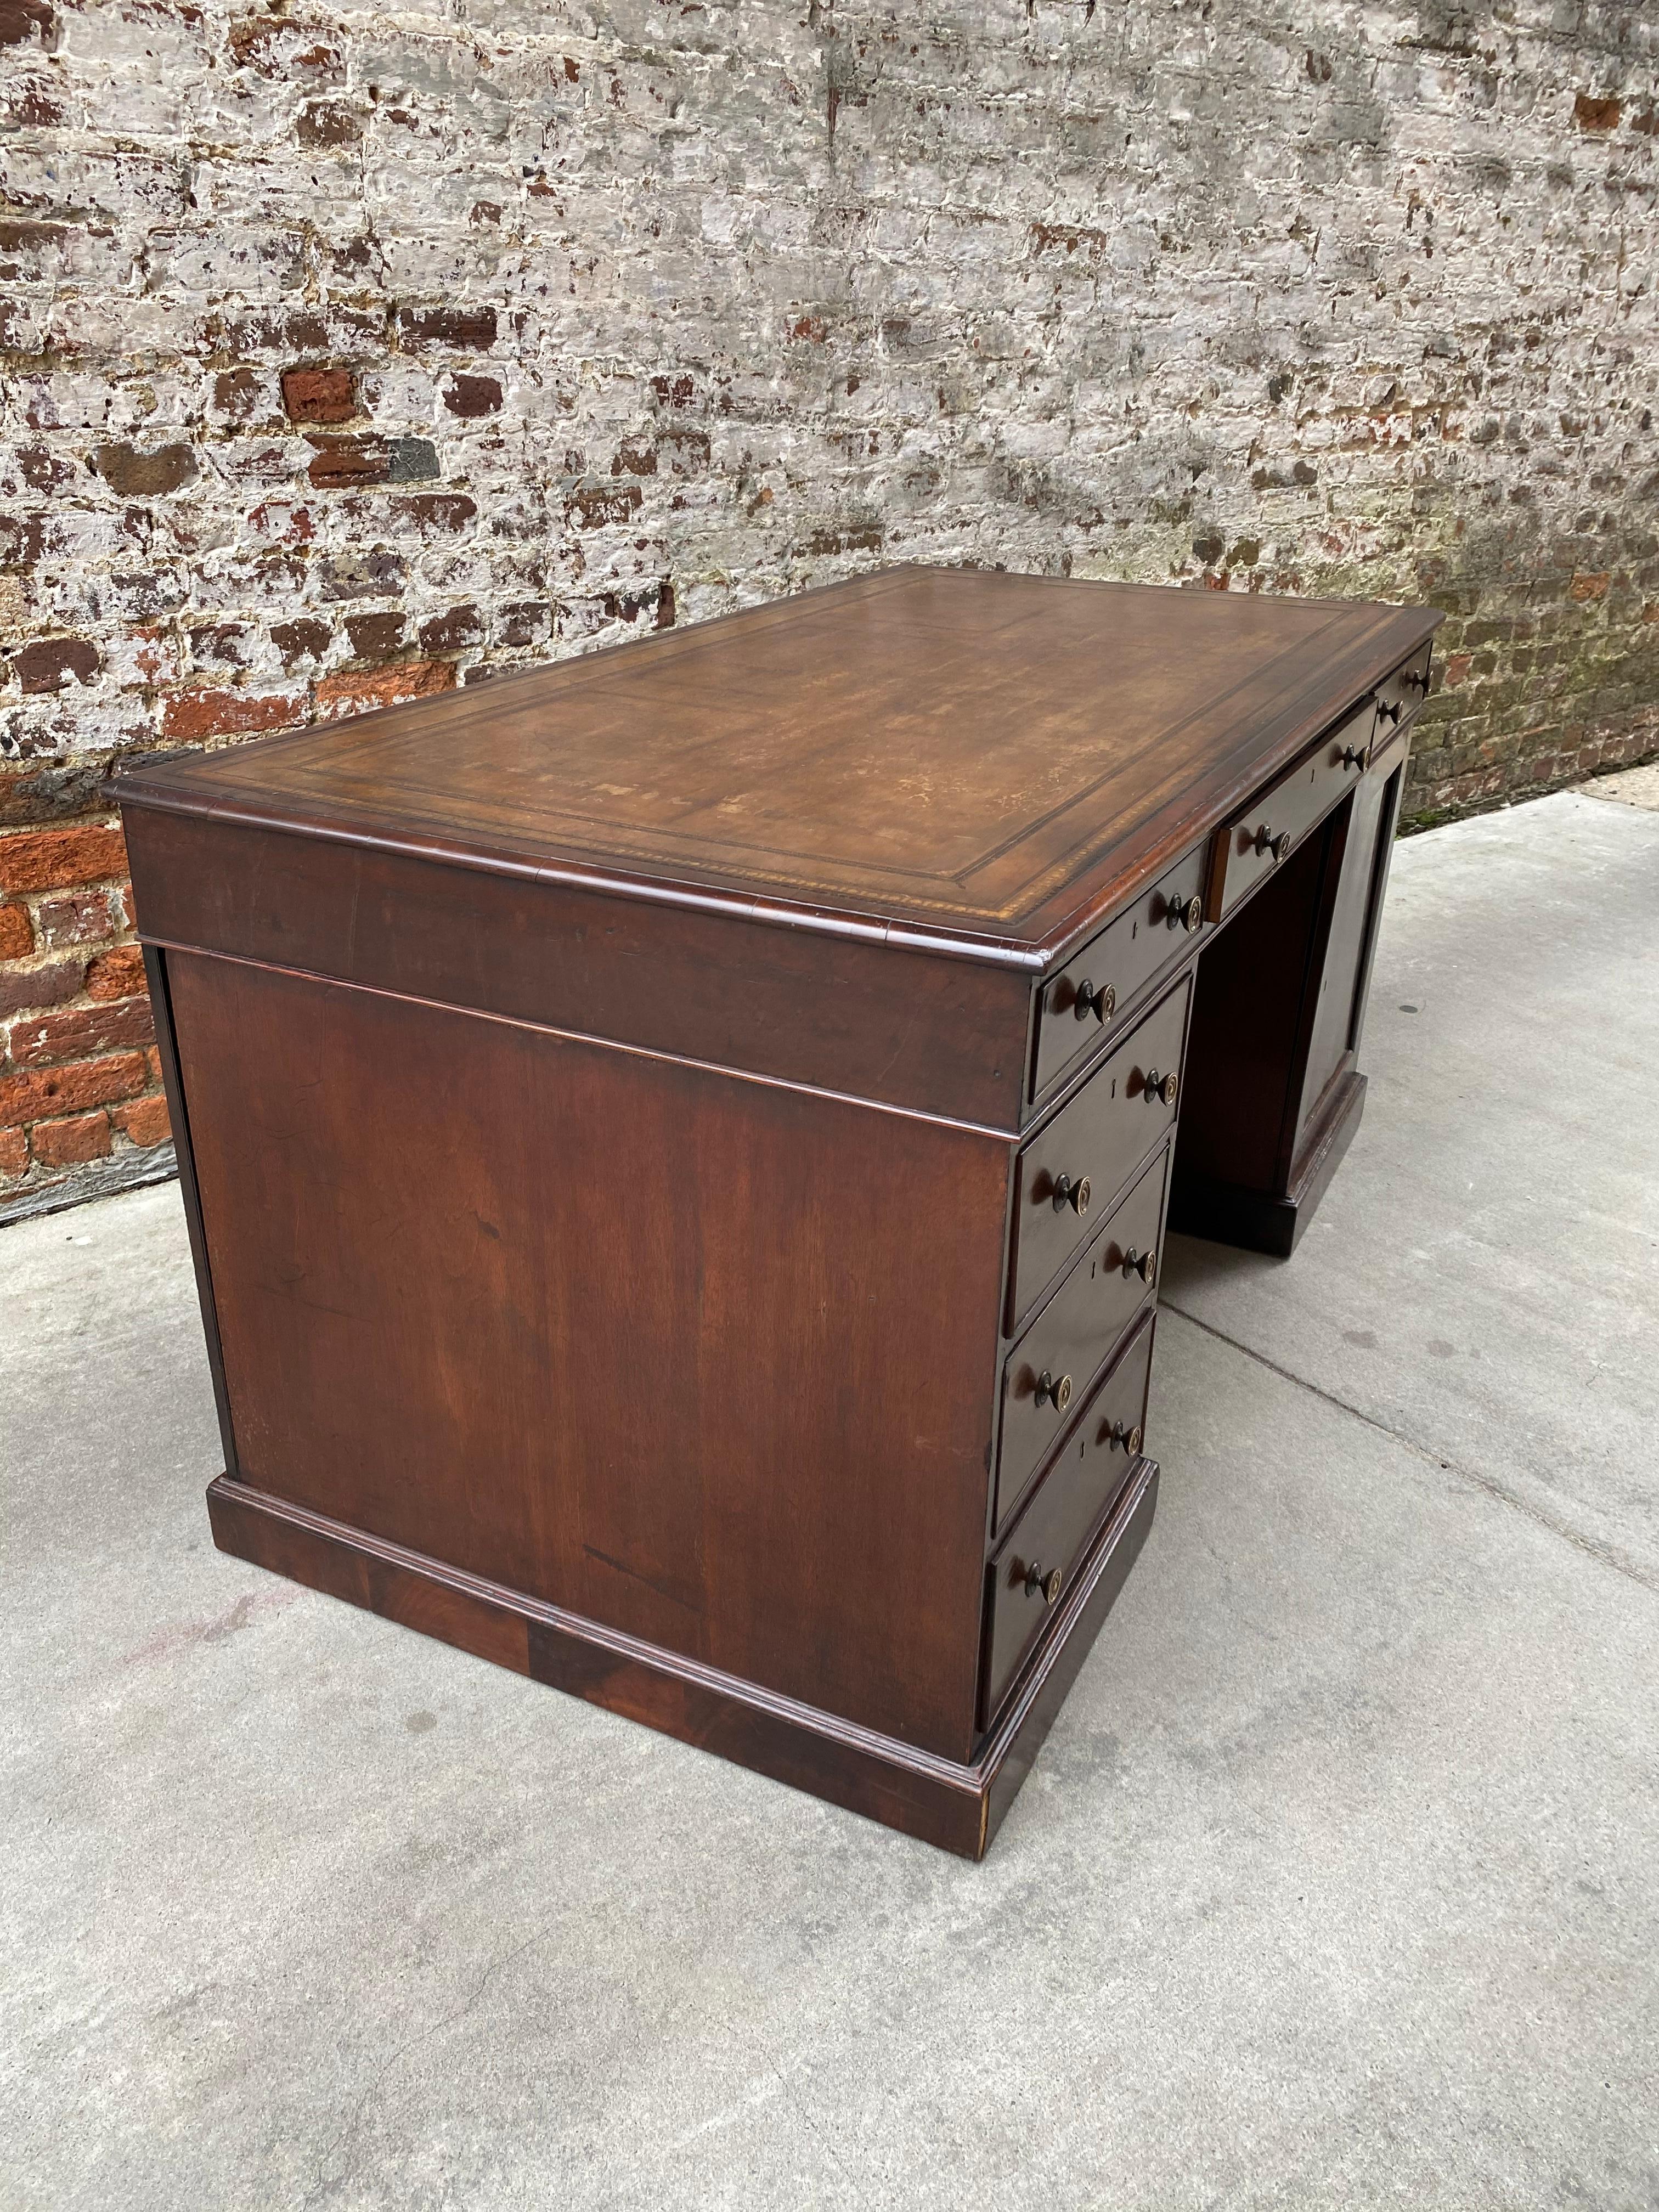 19th Century Mahogany Partners Desk with Tooled Leather Writing Surface 1